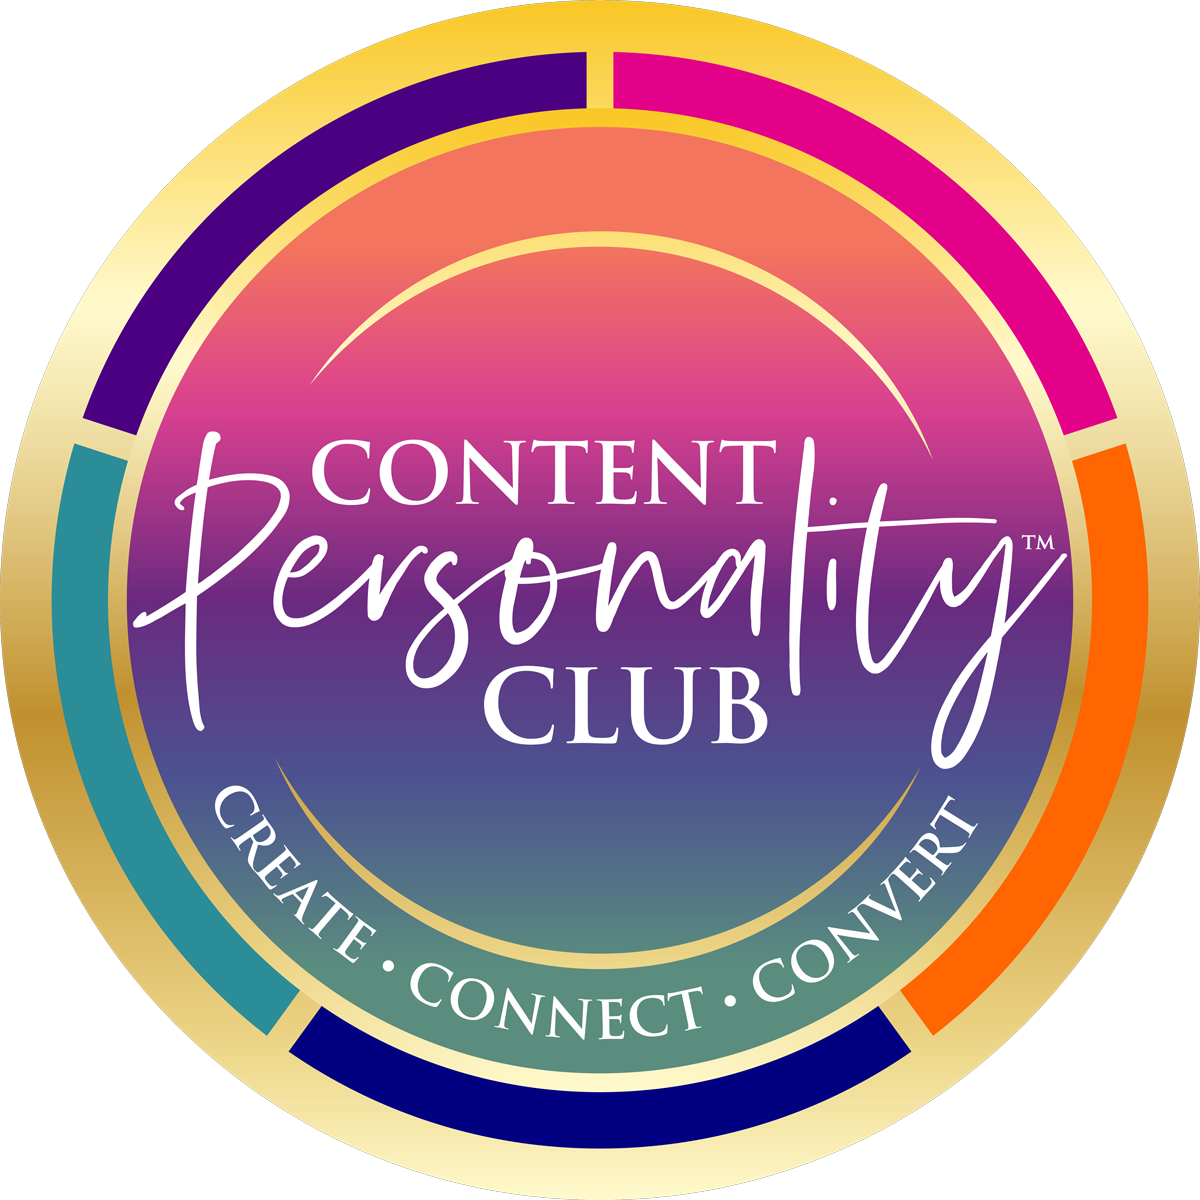 Content Personality Club logo